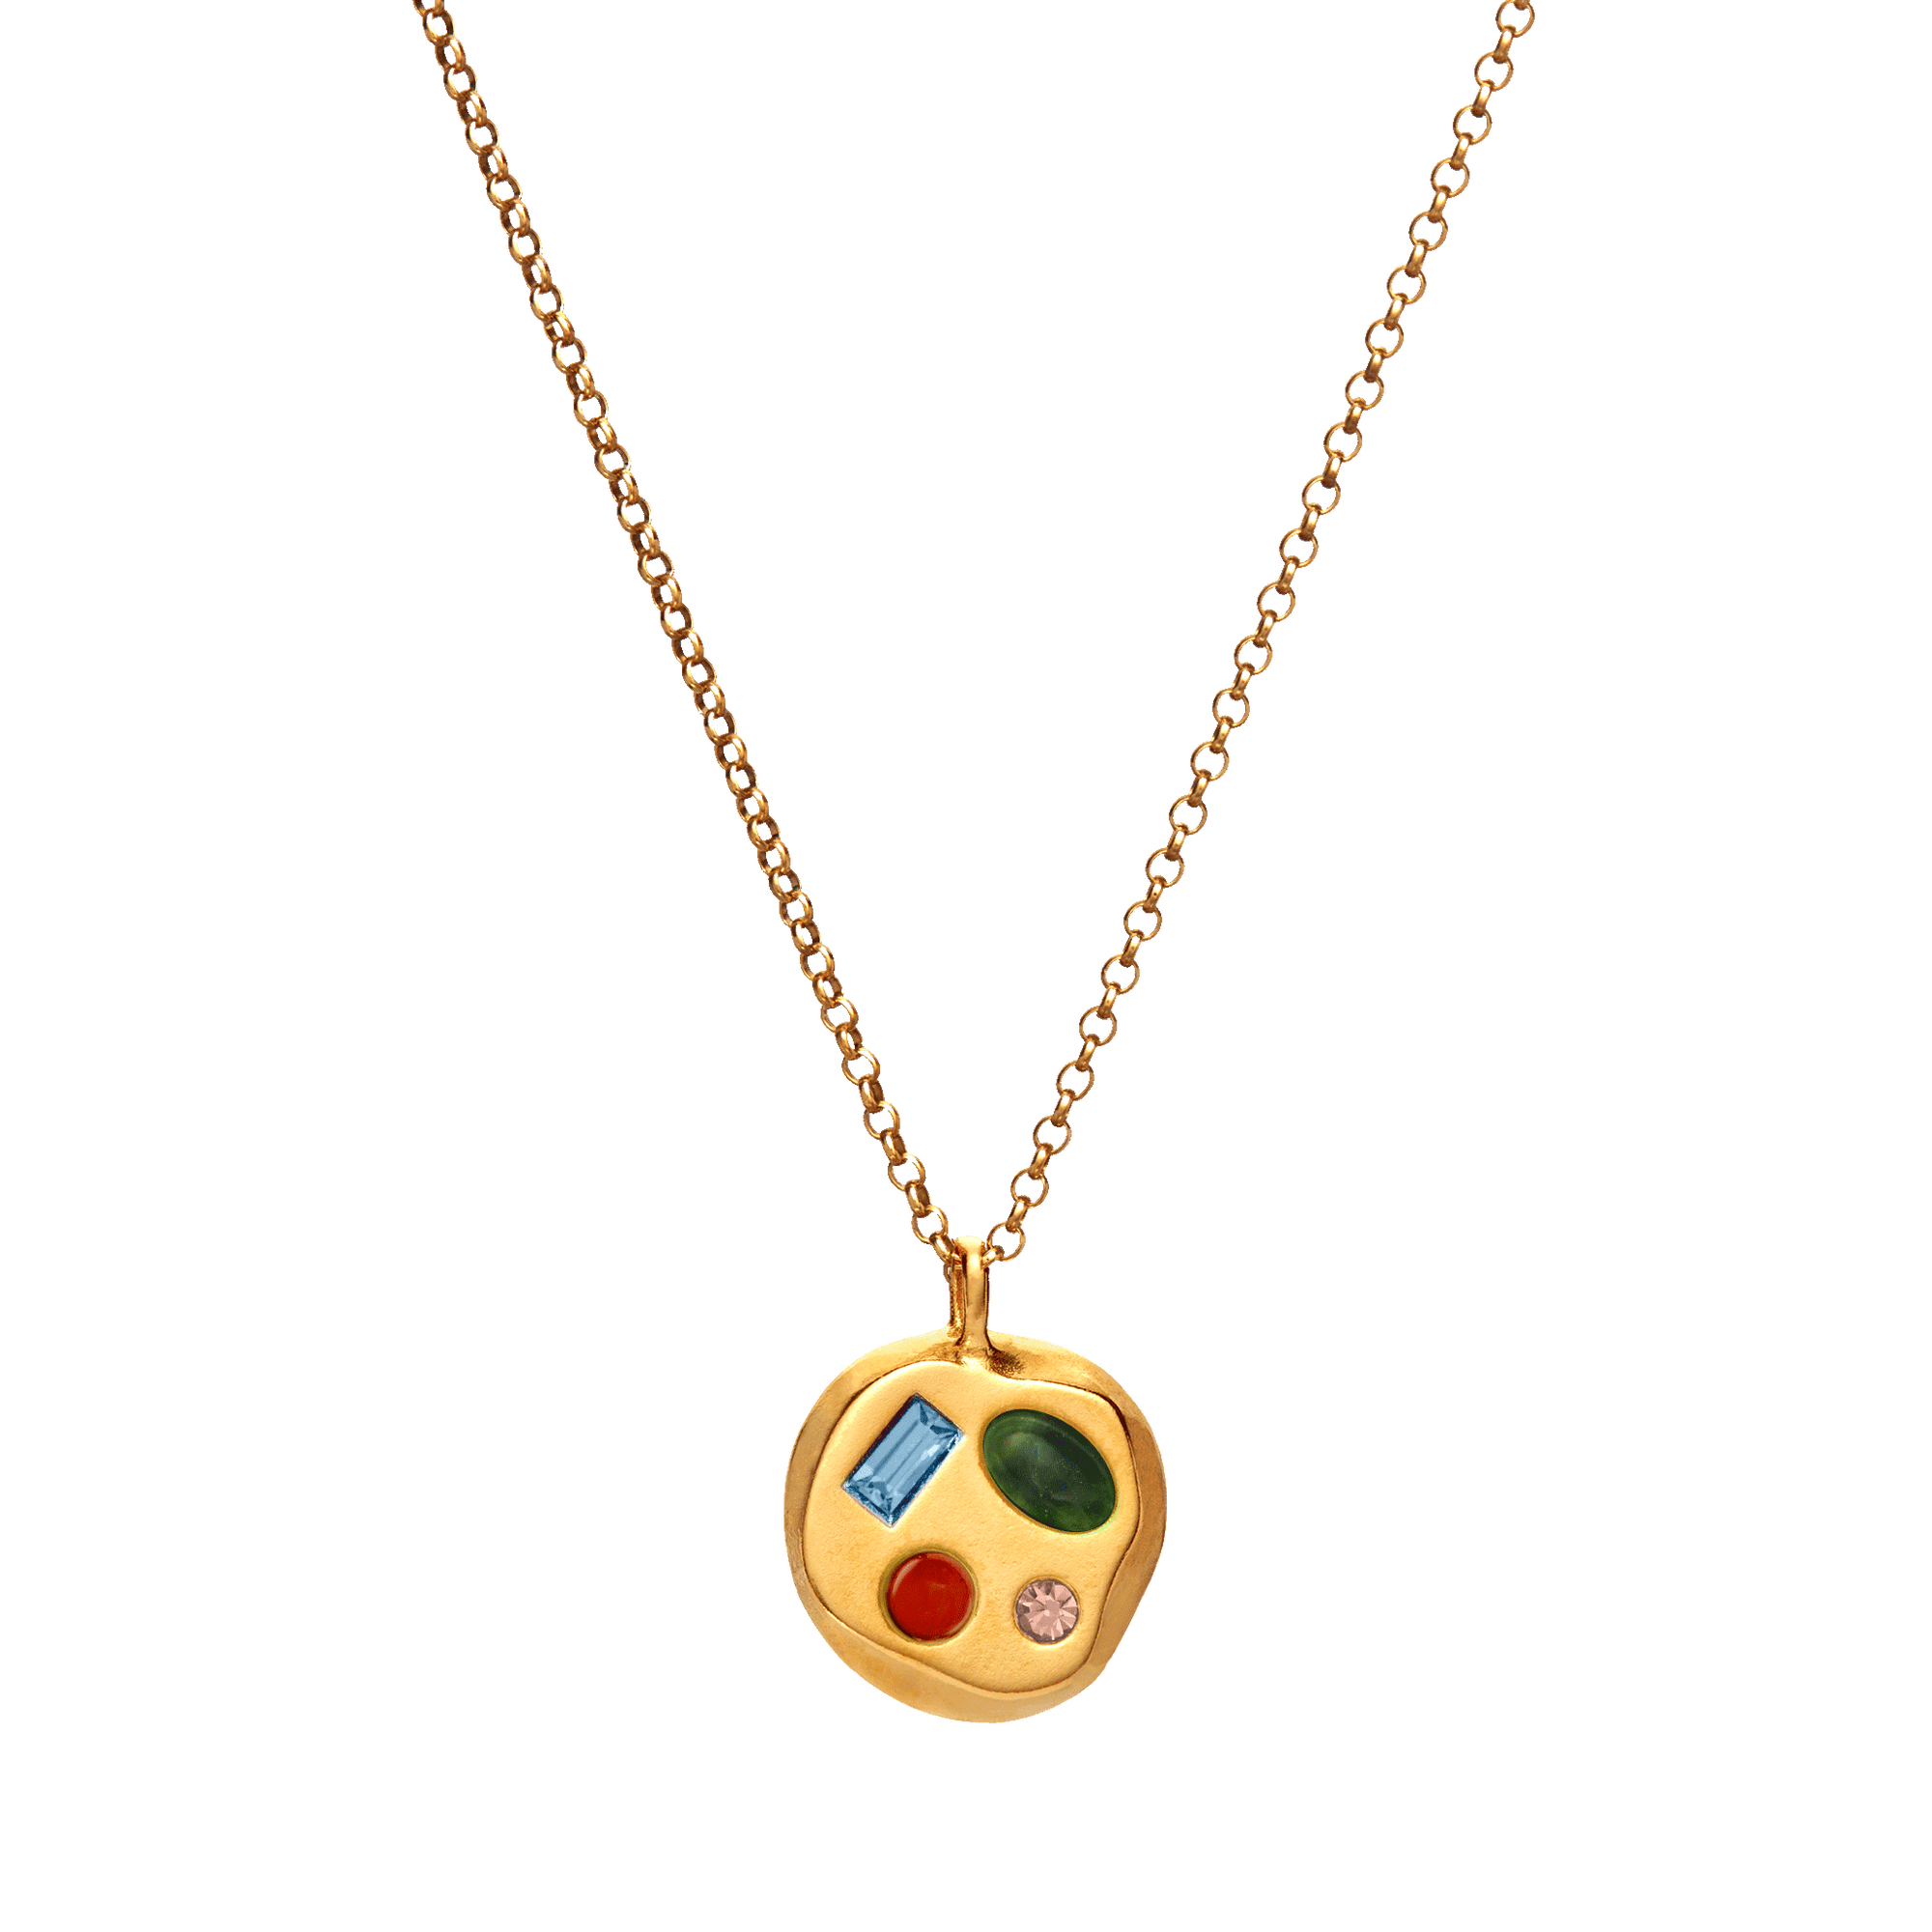 The March Nineteenth Pendant